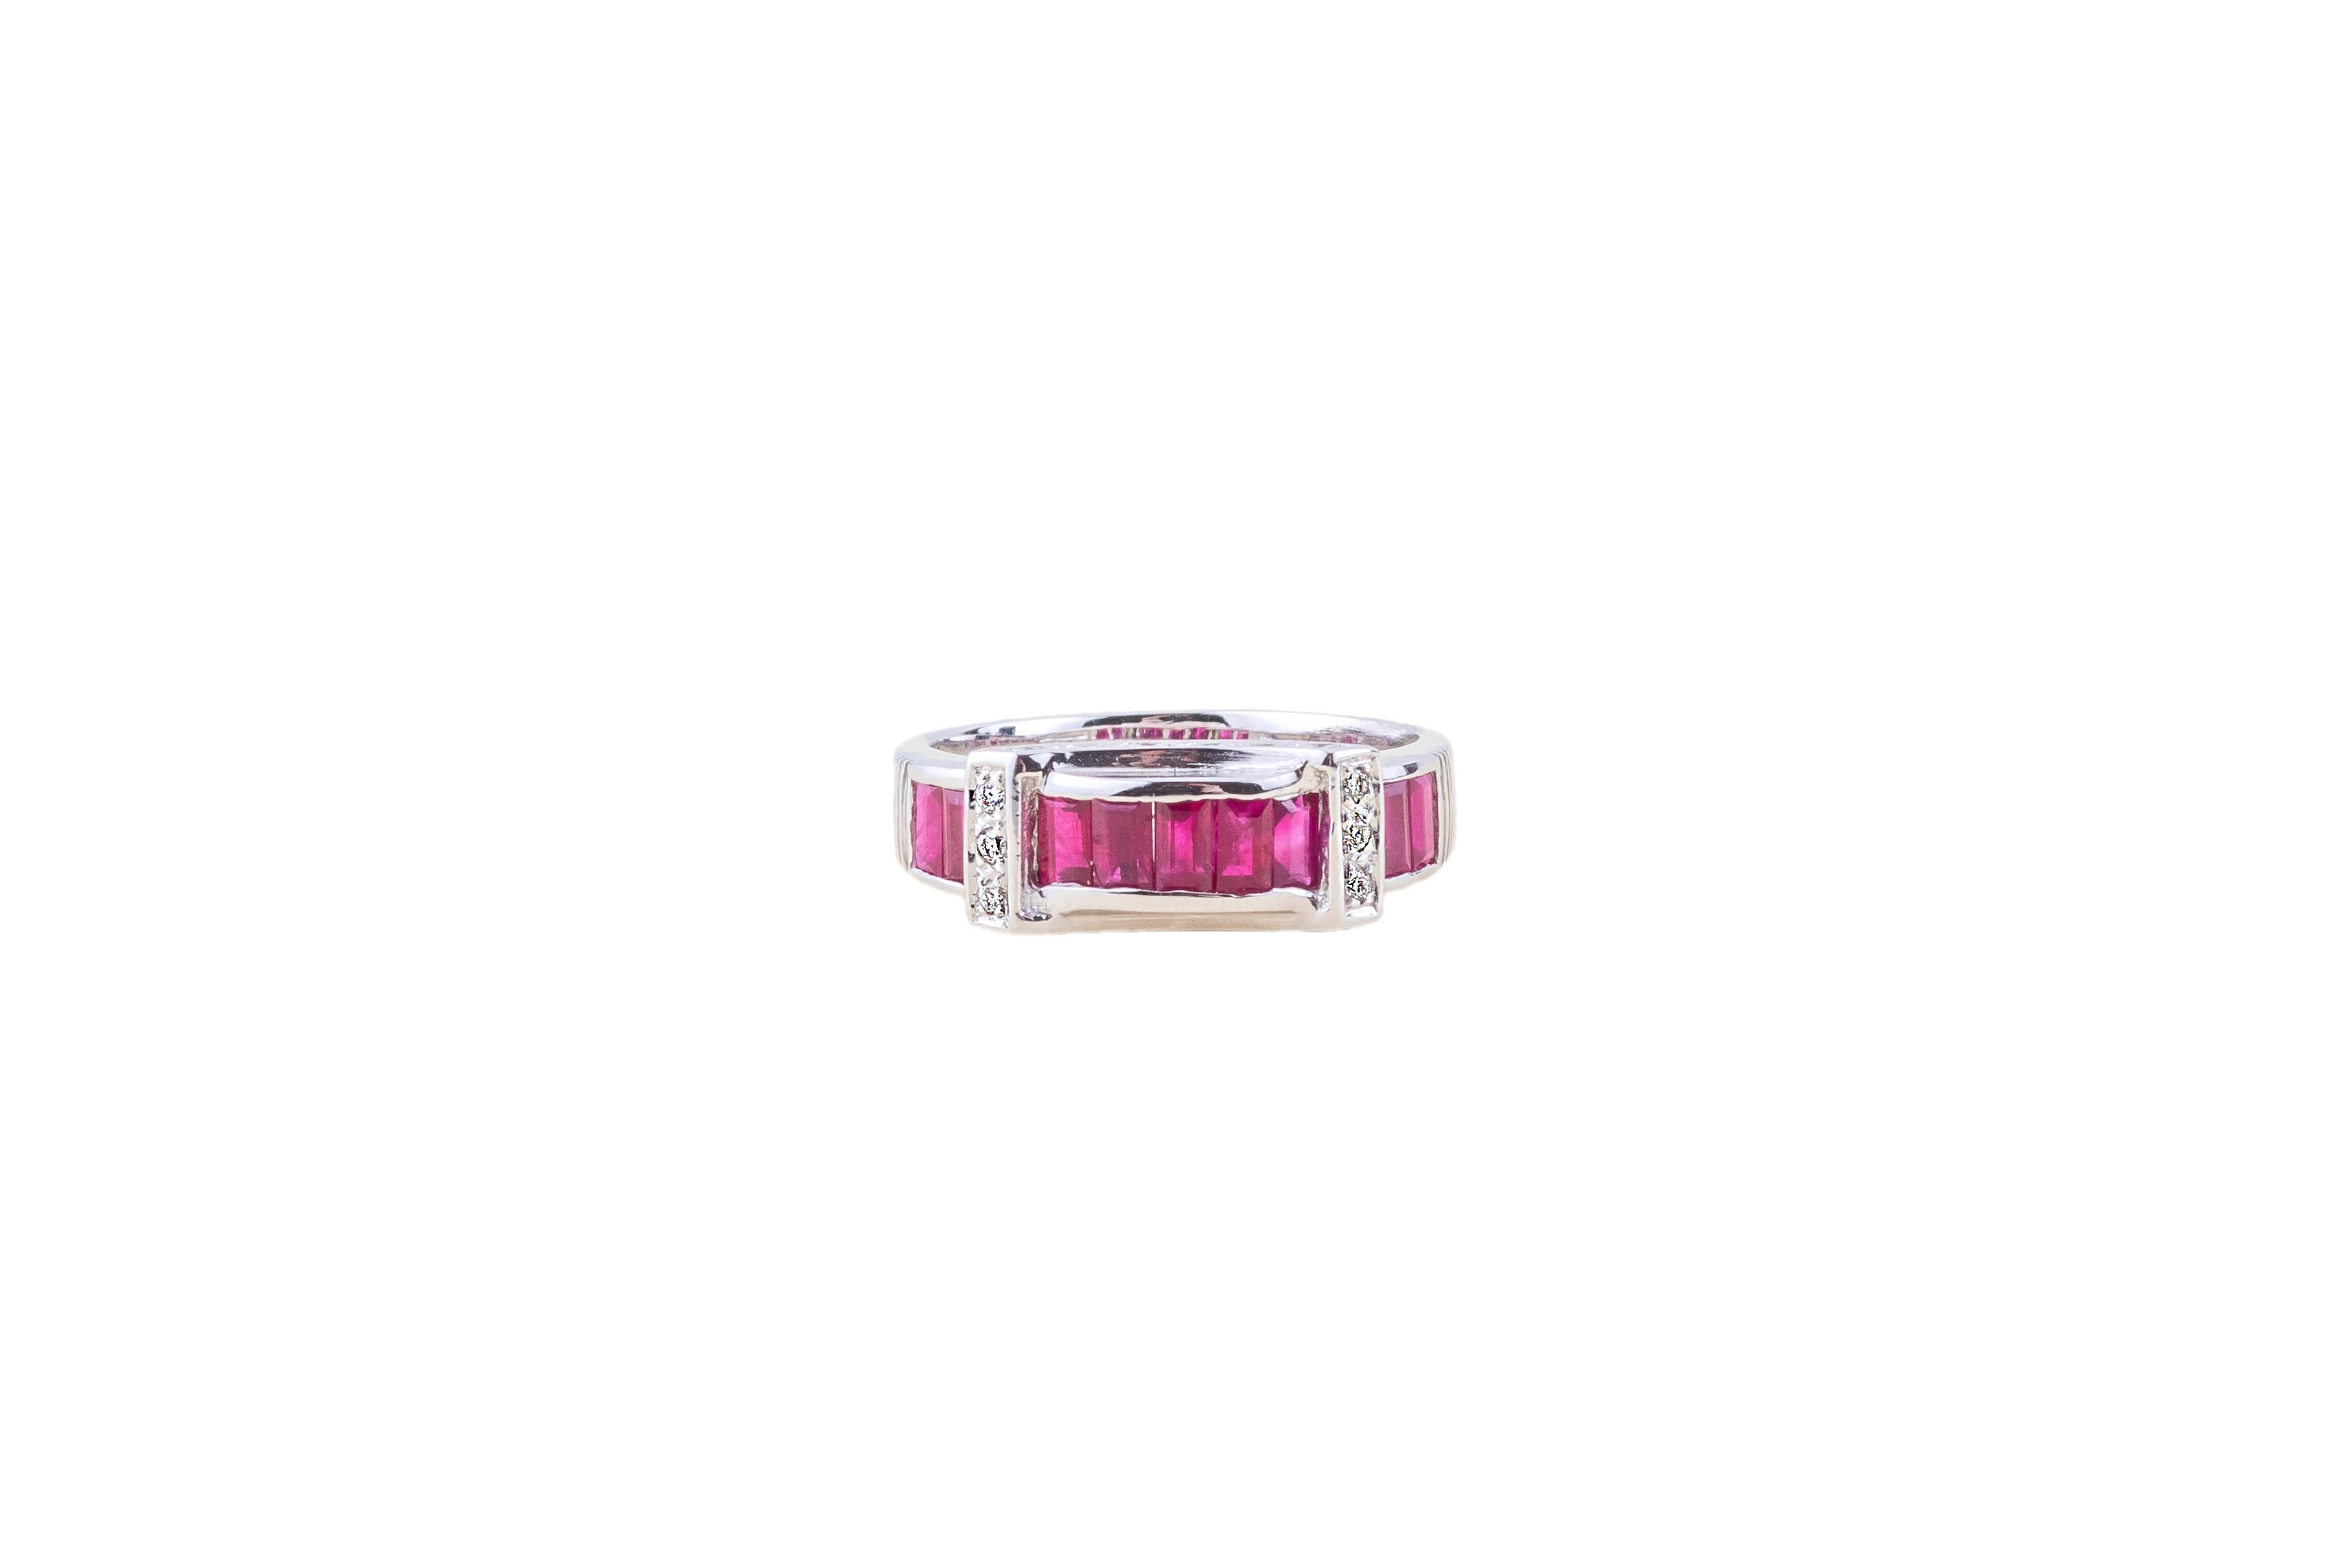 18 k white gold
punched with a fine content of 18 k
0,16 ct diamonds
1.45 ct rubies
Ring size 13-53
Weight 4,6 gram
